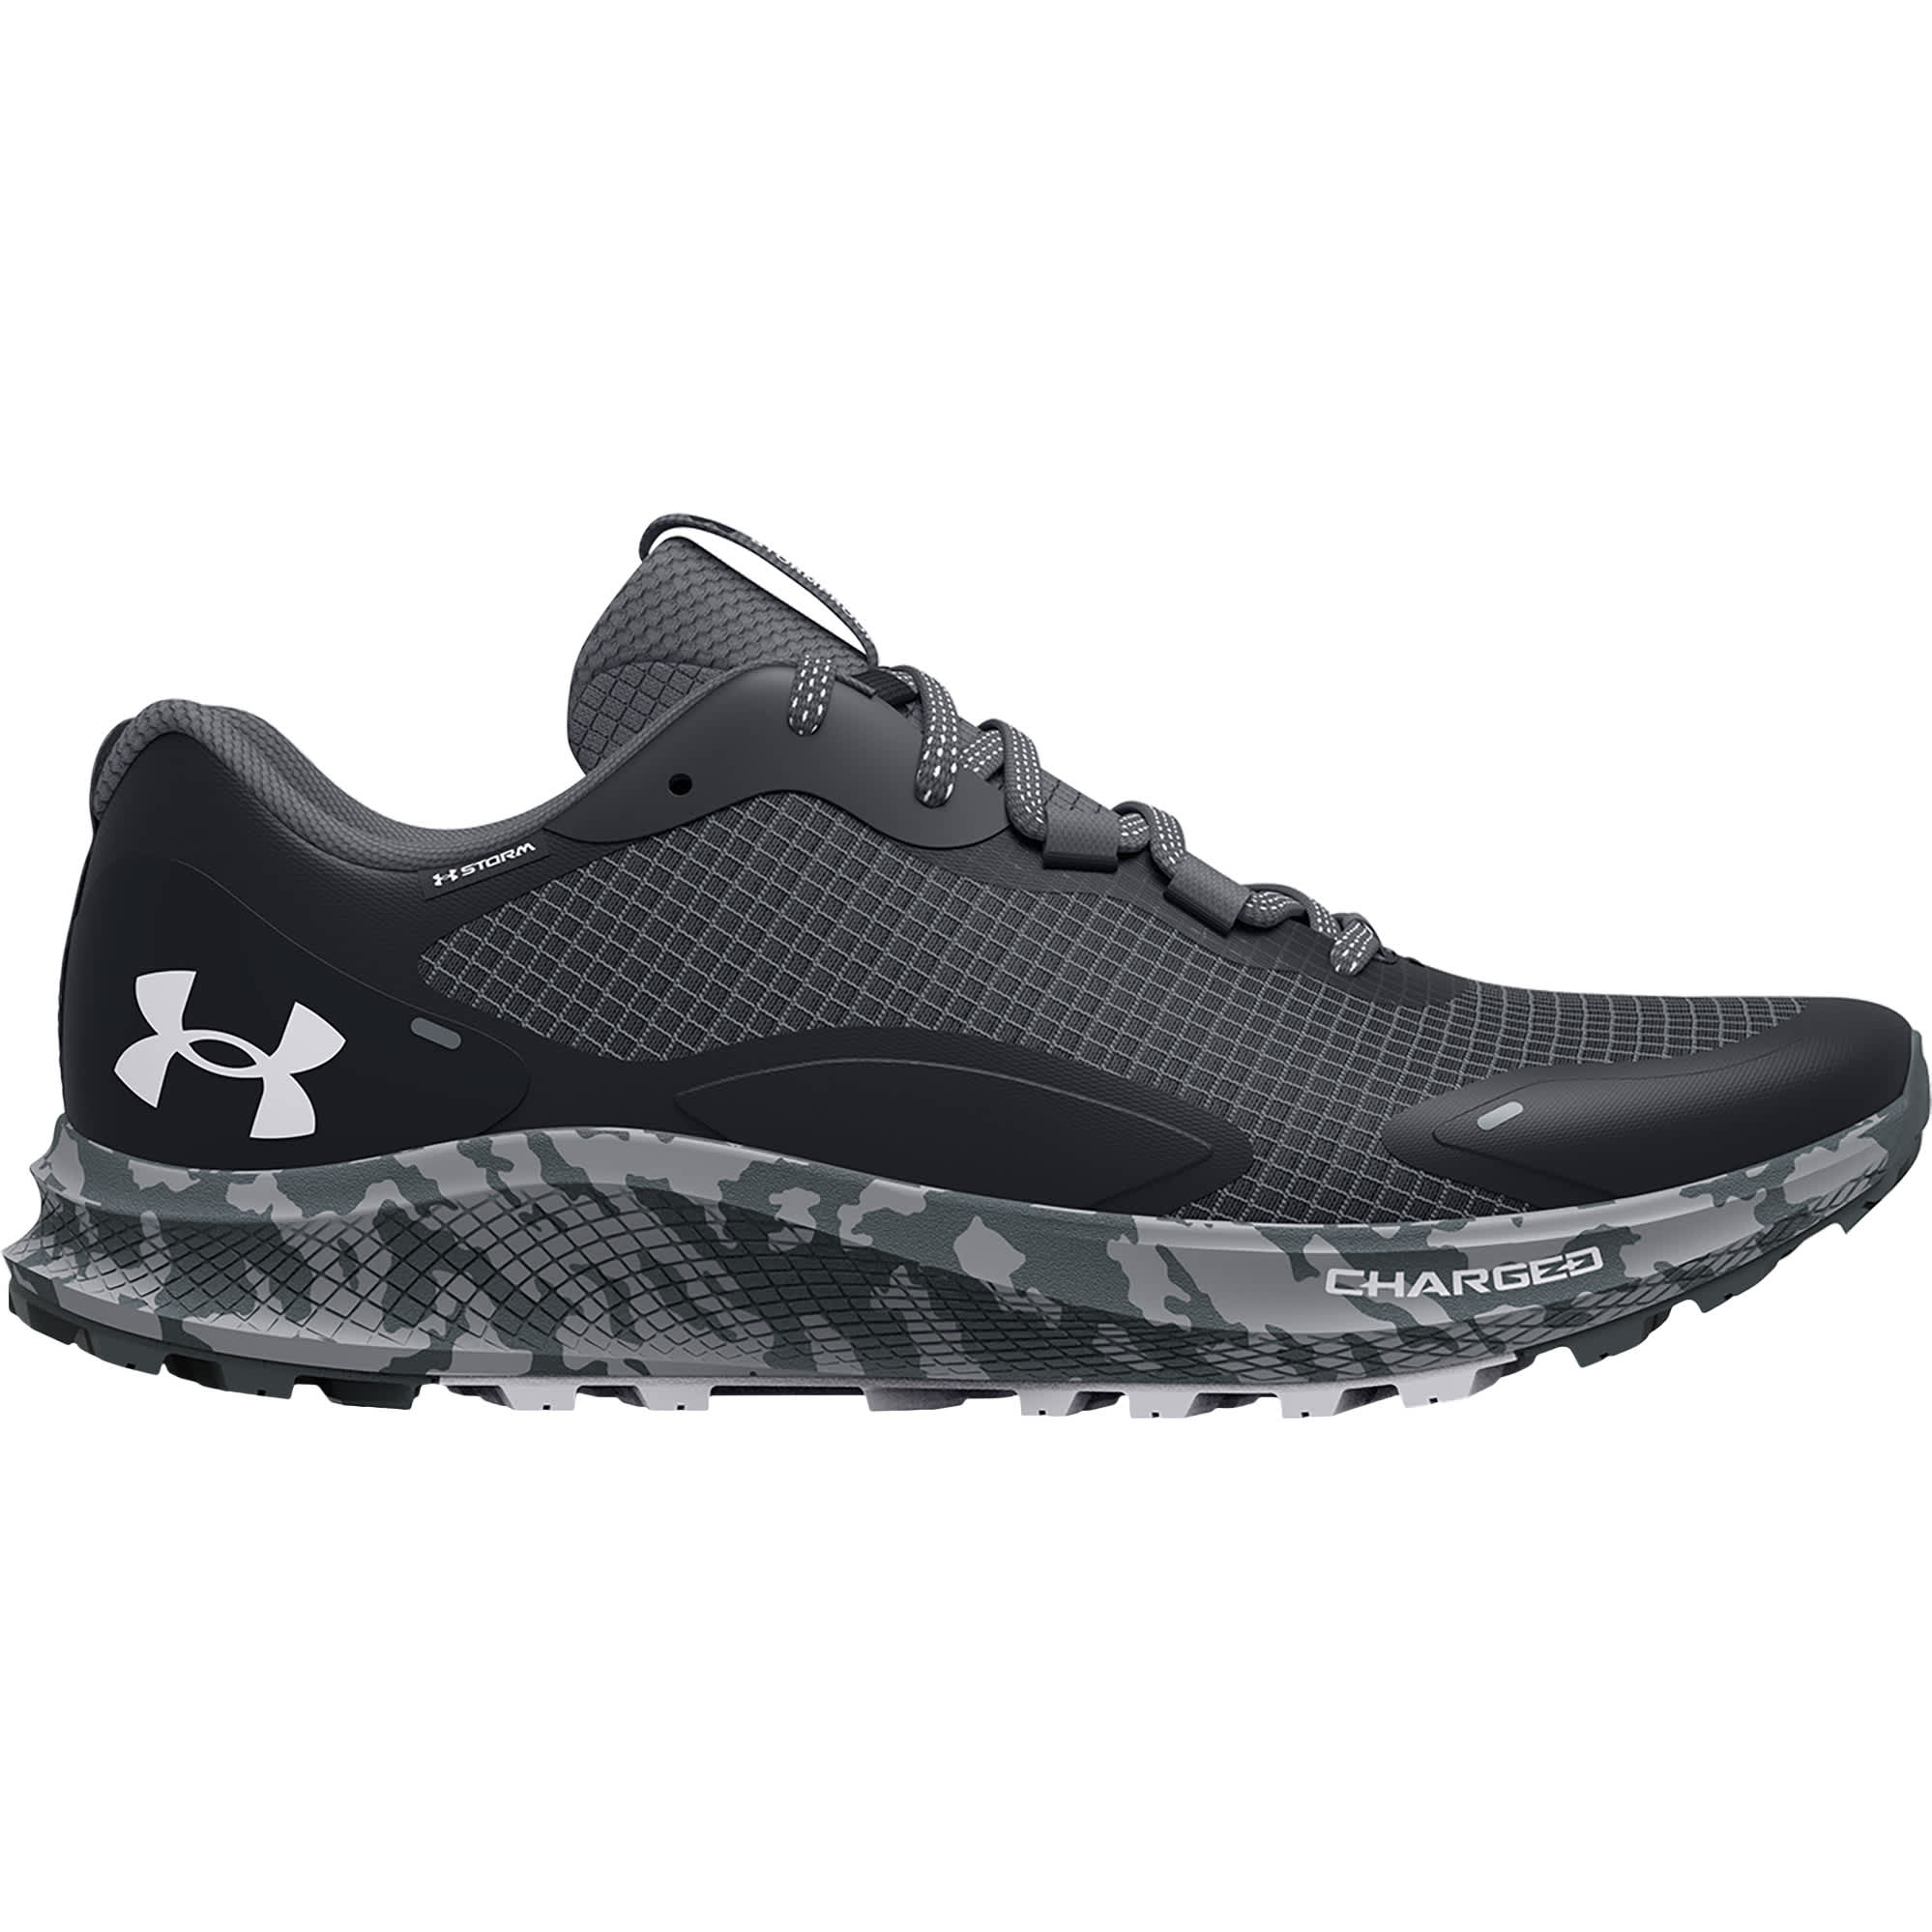 Under Armour's Charged Bandit 5 Running Shoes [Review]